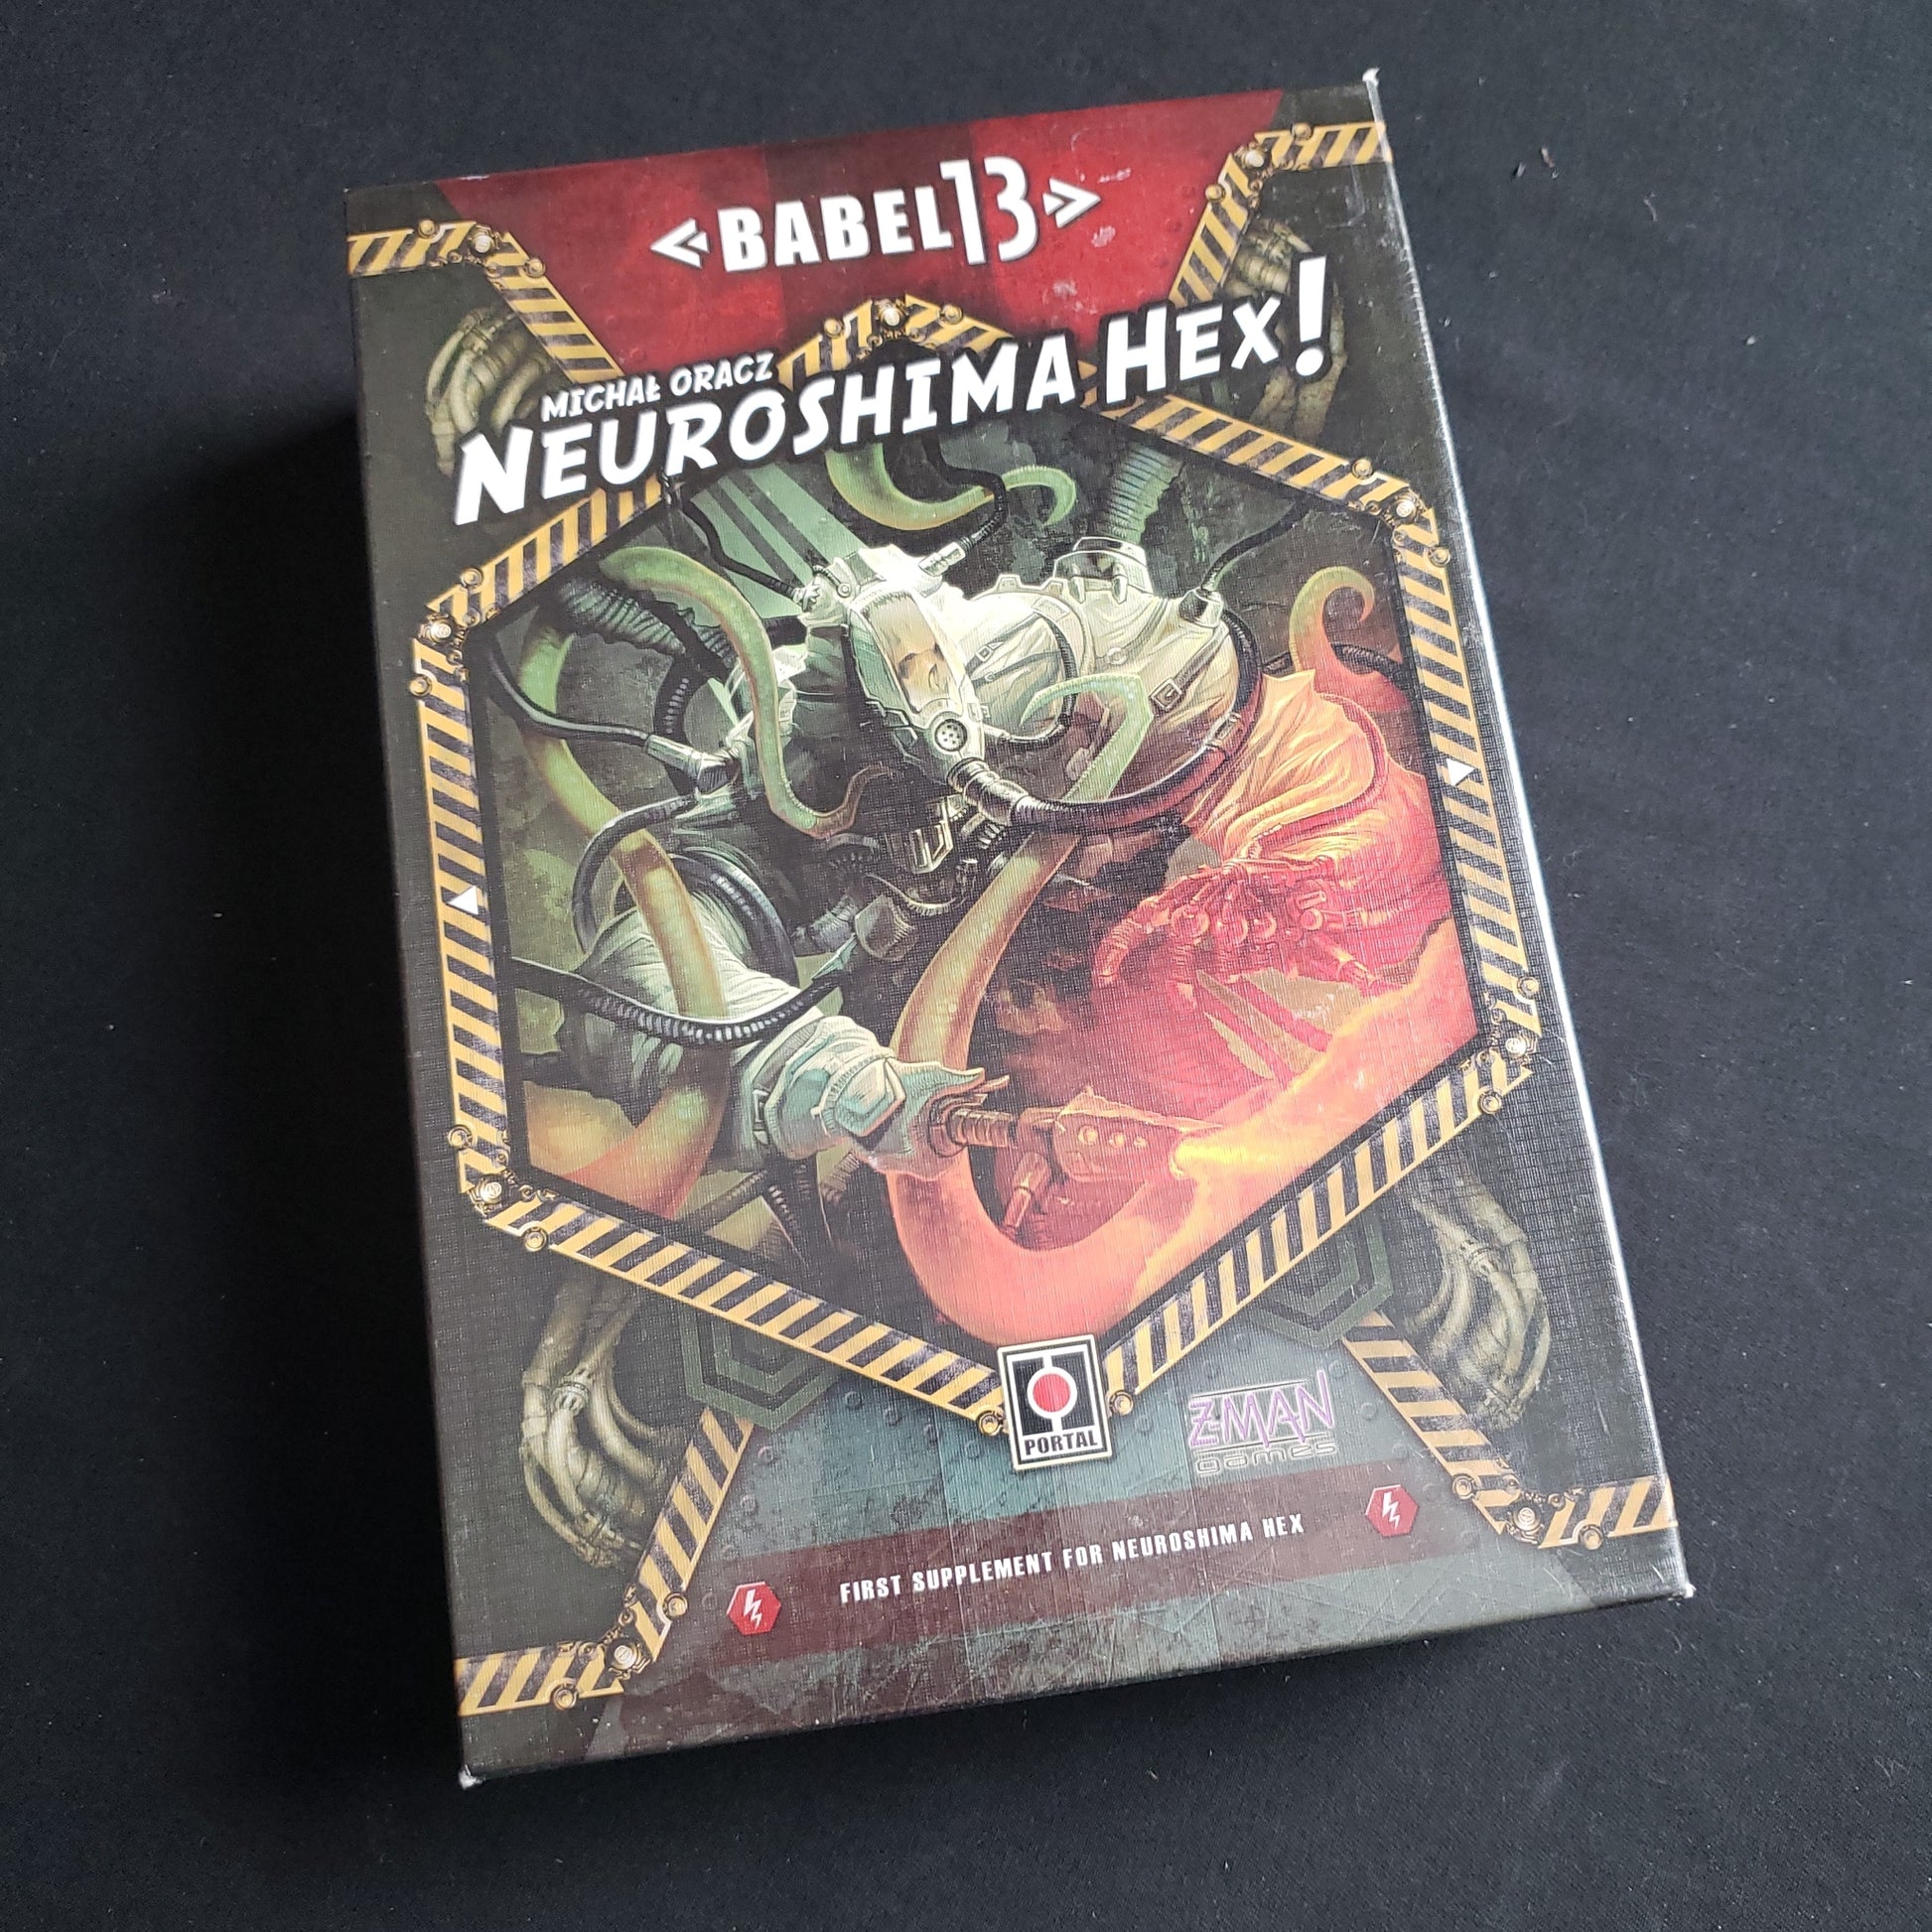 Image shows the front cover of the box of the Babel13 expansion for the board game Neuroshima Hex!